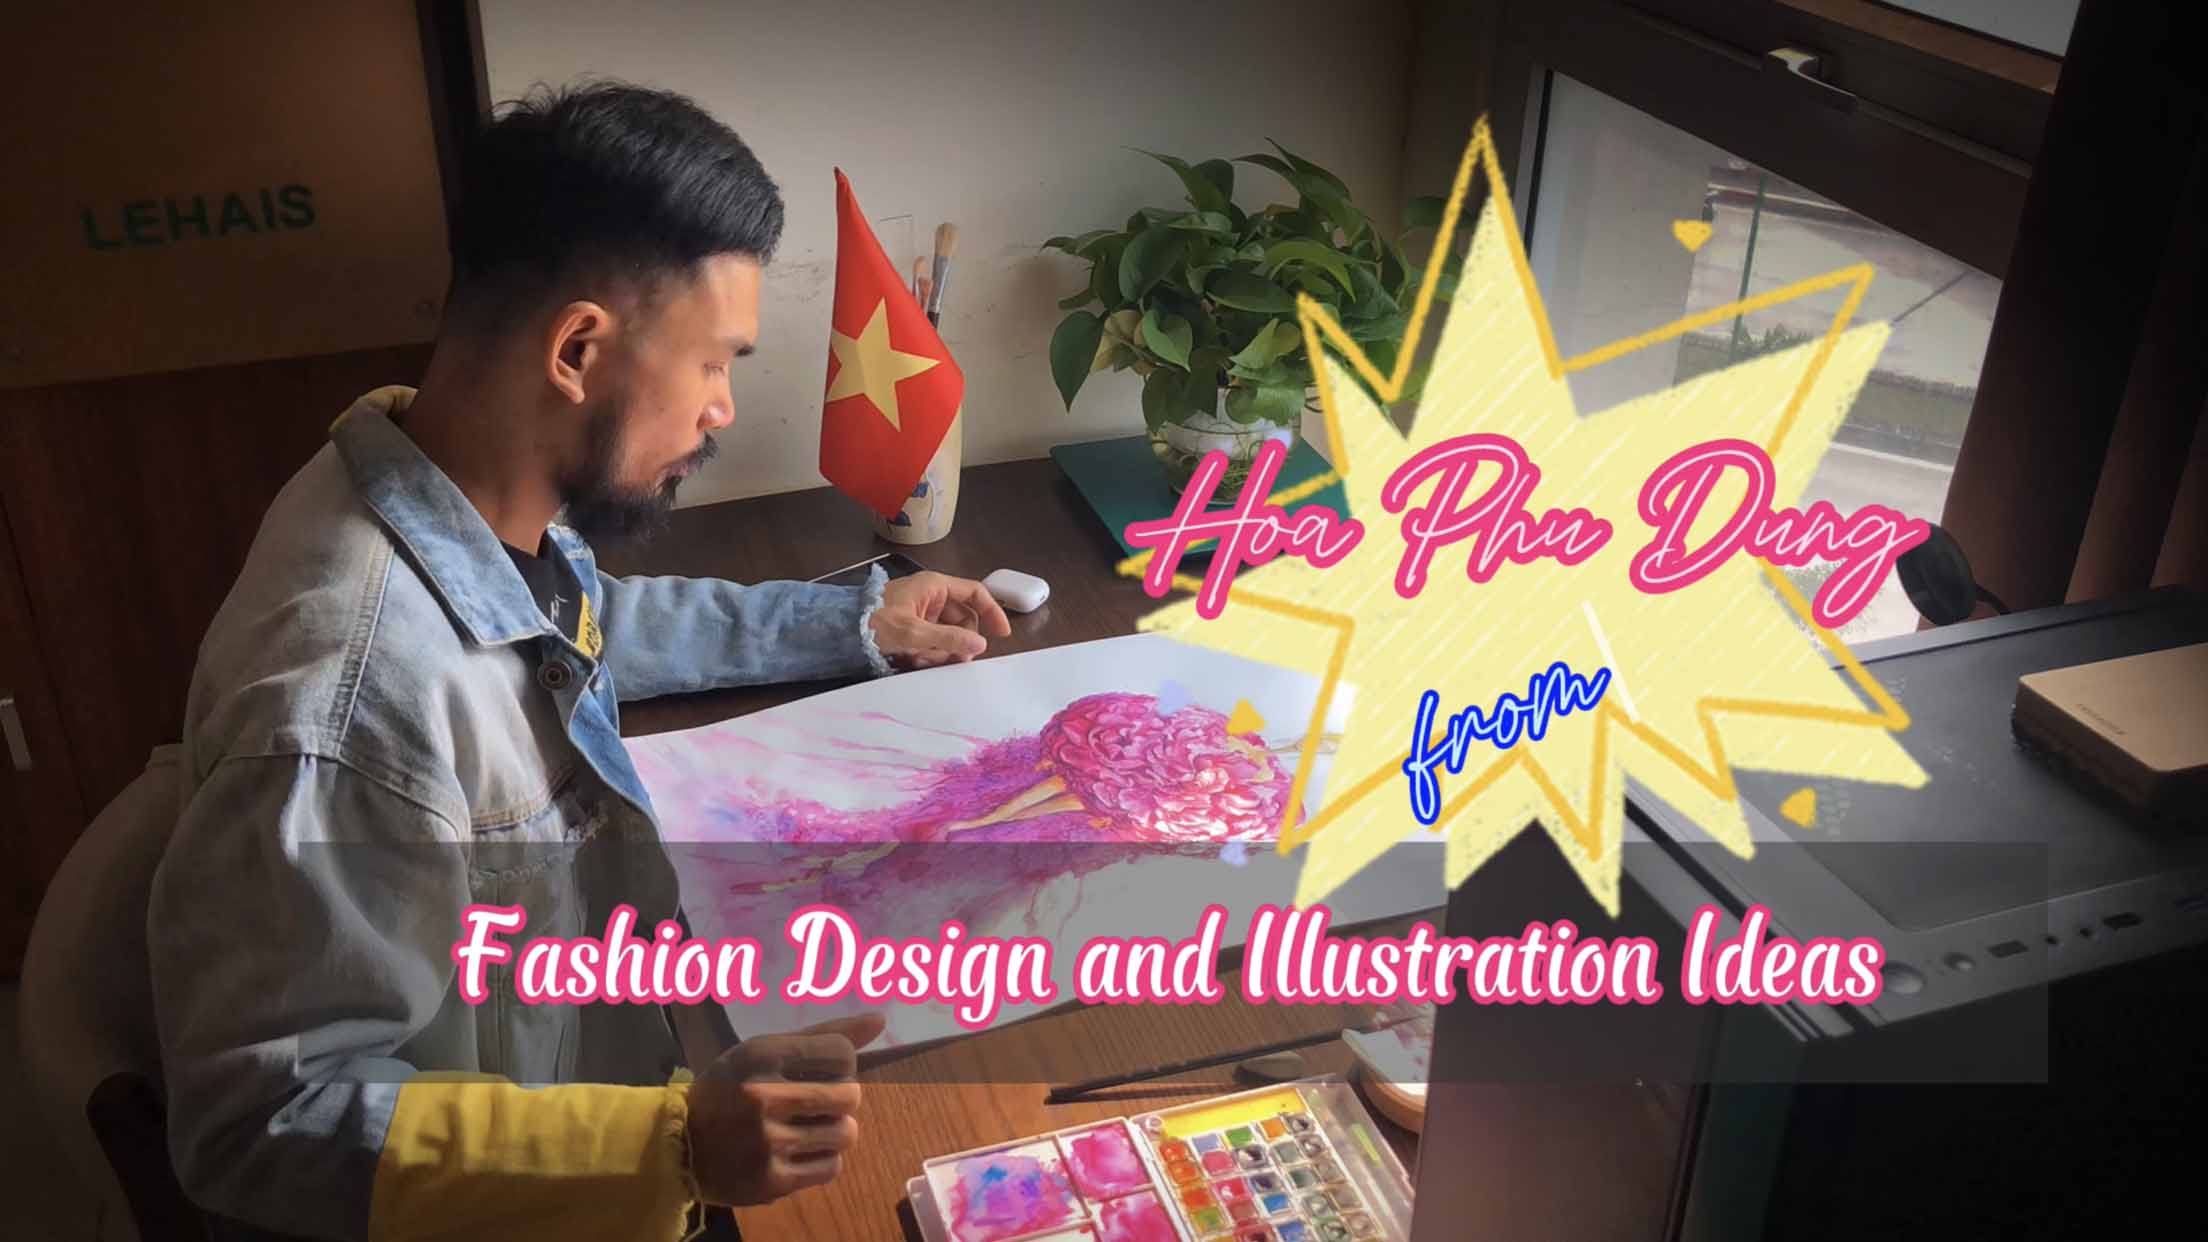 Fashion Design and Illustration ideas from Hoa Phu Dung 2